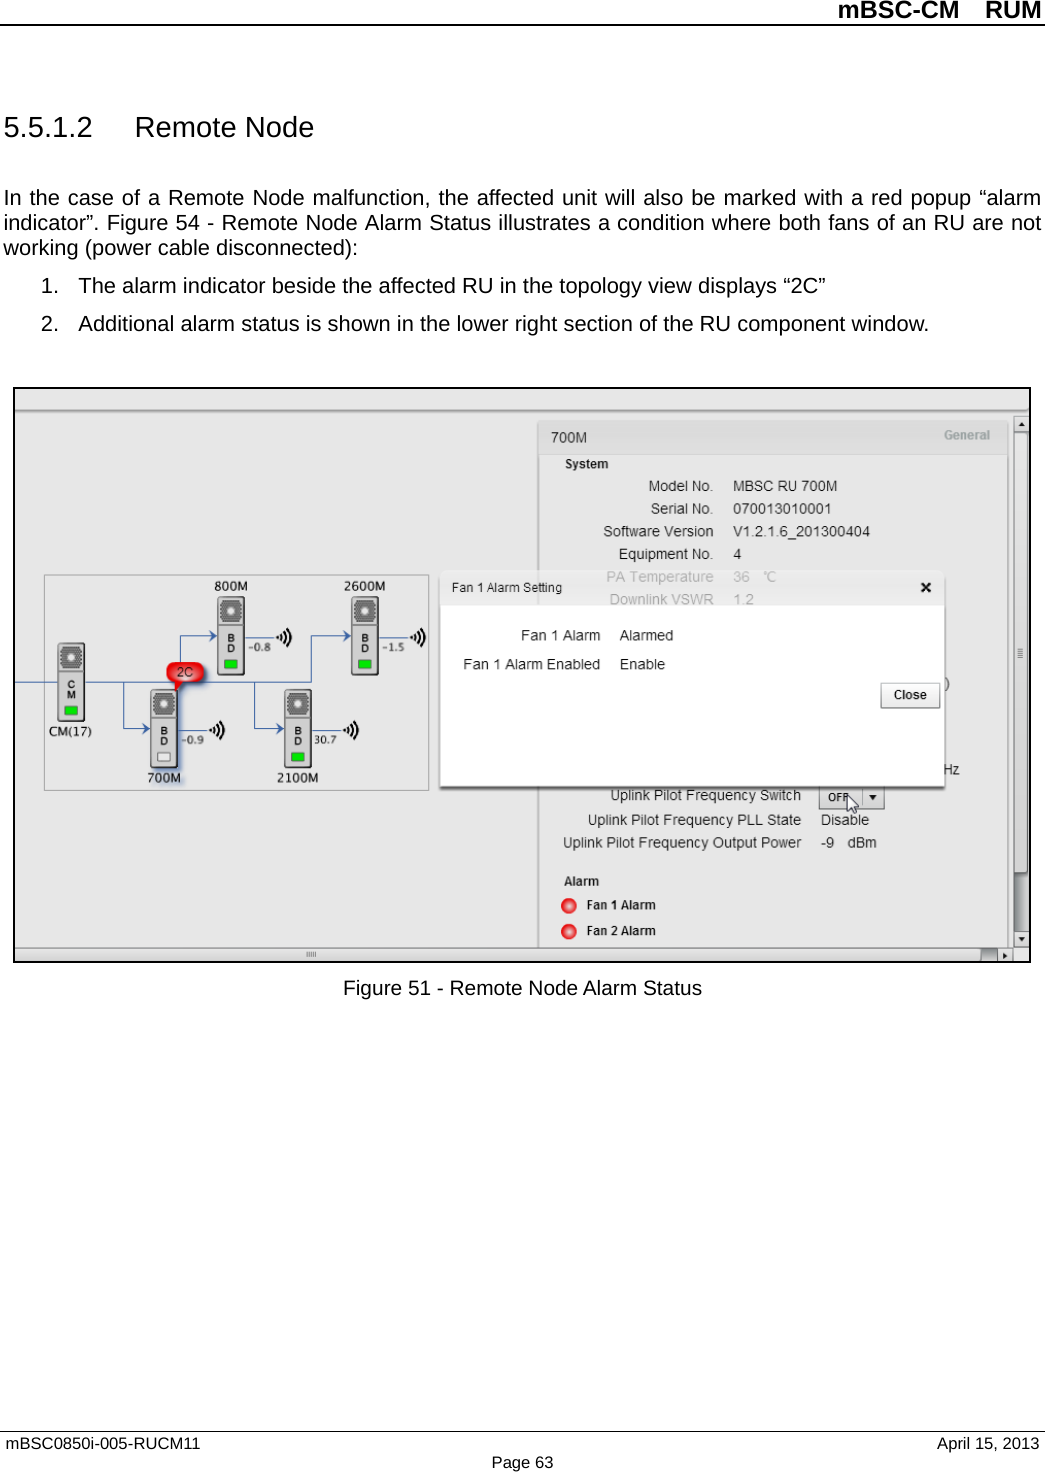          mBSC-CM  RUM   mBSC0850i-005-RUCM11                                 April 15, 2013 Page 63 5.5.1.2 Remote Node In the case of a Remote Node malfunction, the affected unit will also be marked with a red popup “alarm indicator”. Figure 54 - Remote Node Alarm Status illustrates a condition where both fans of an RU are not working (power cable disconnected): 1. The alarm indicator beside the affected RU in the topology view displays “2C”   2. Additional alarm status is shown in the lower right section of the RU component window.     Figure 51 - Remote Node Alarm Status    